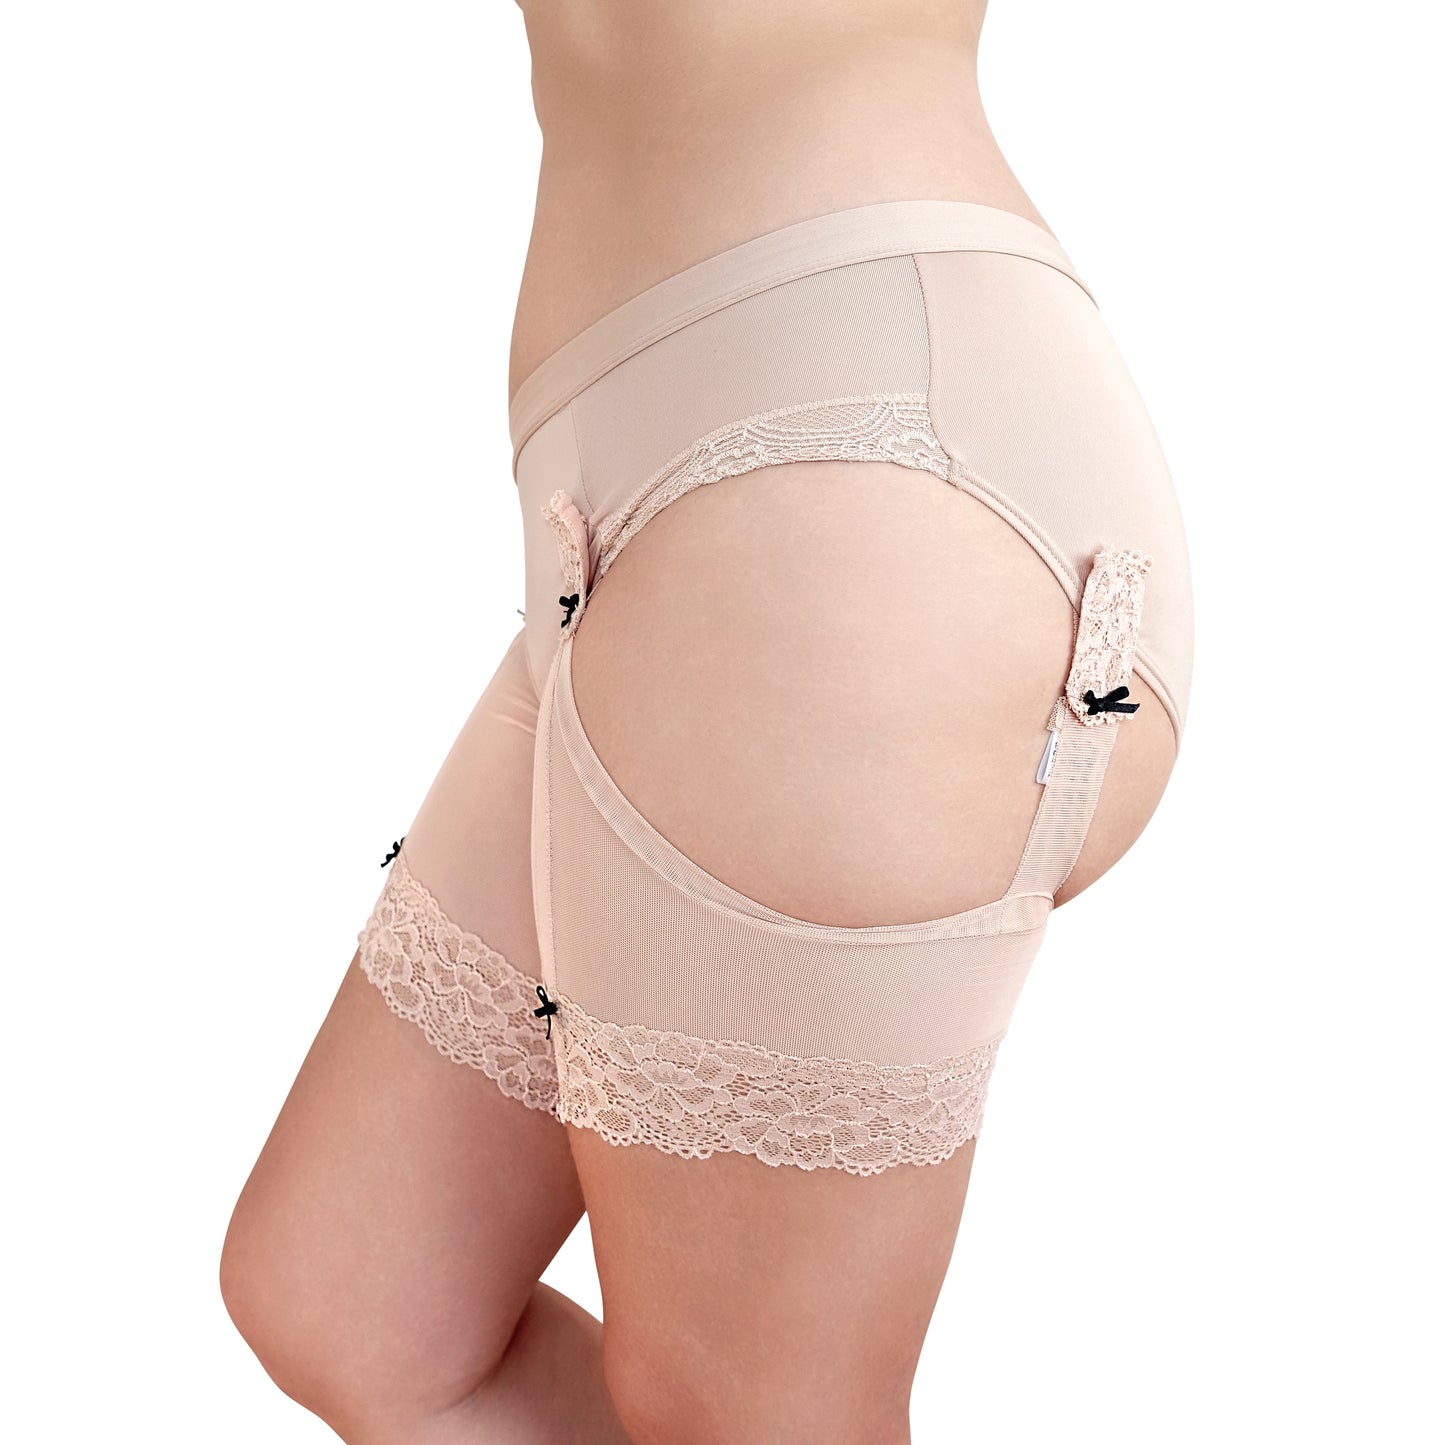 ANTI CHAFE Clip-On Thigh Bands - NUDE BEIGE